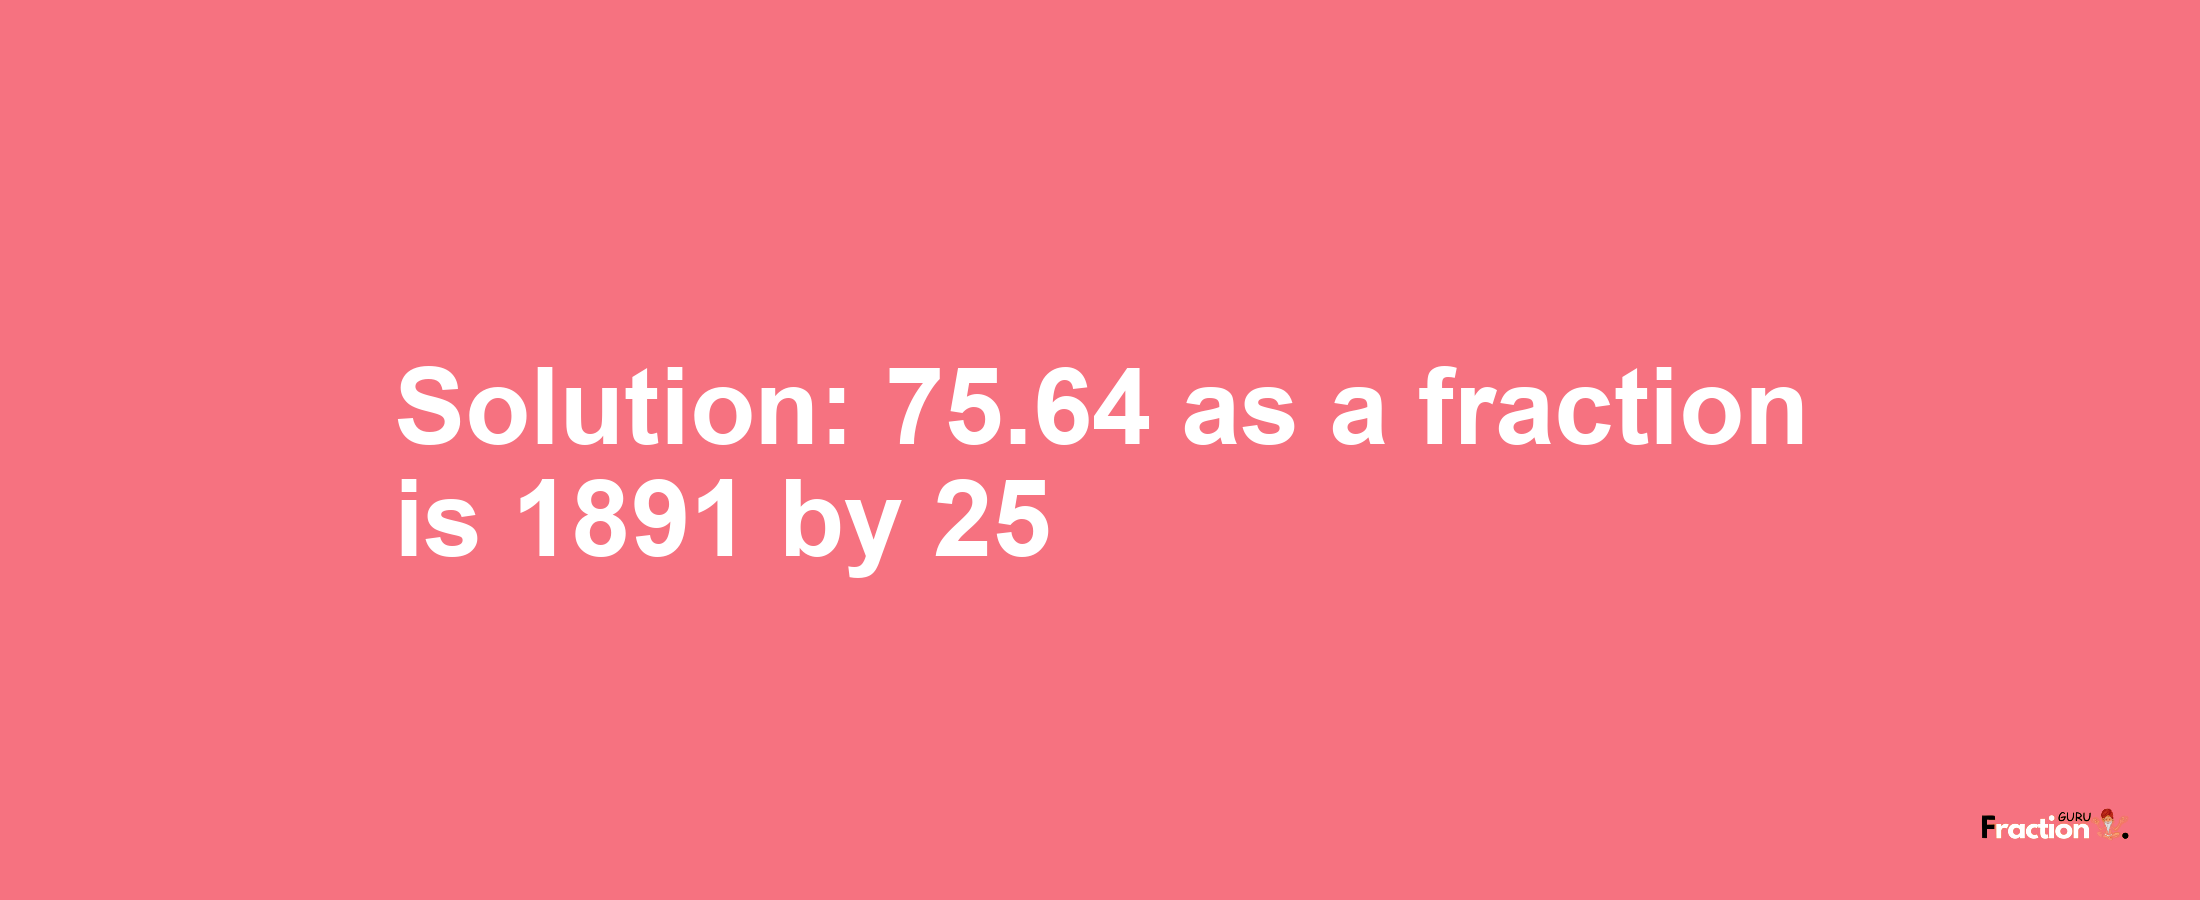 Solution:75.64 as a fraction is 1891/25